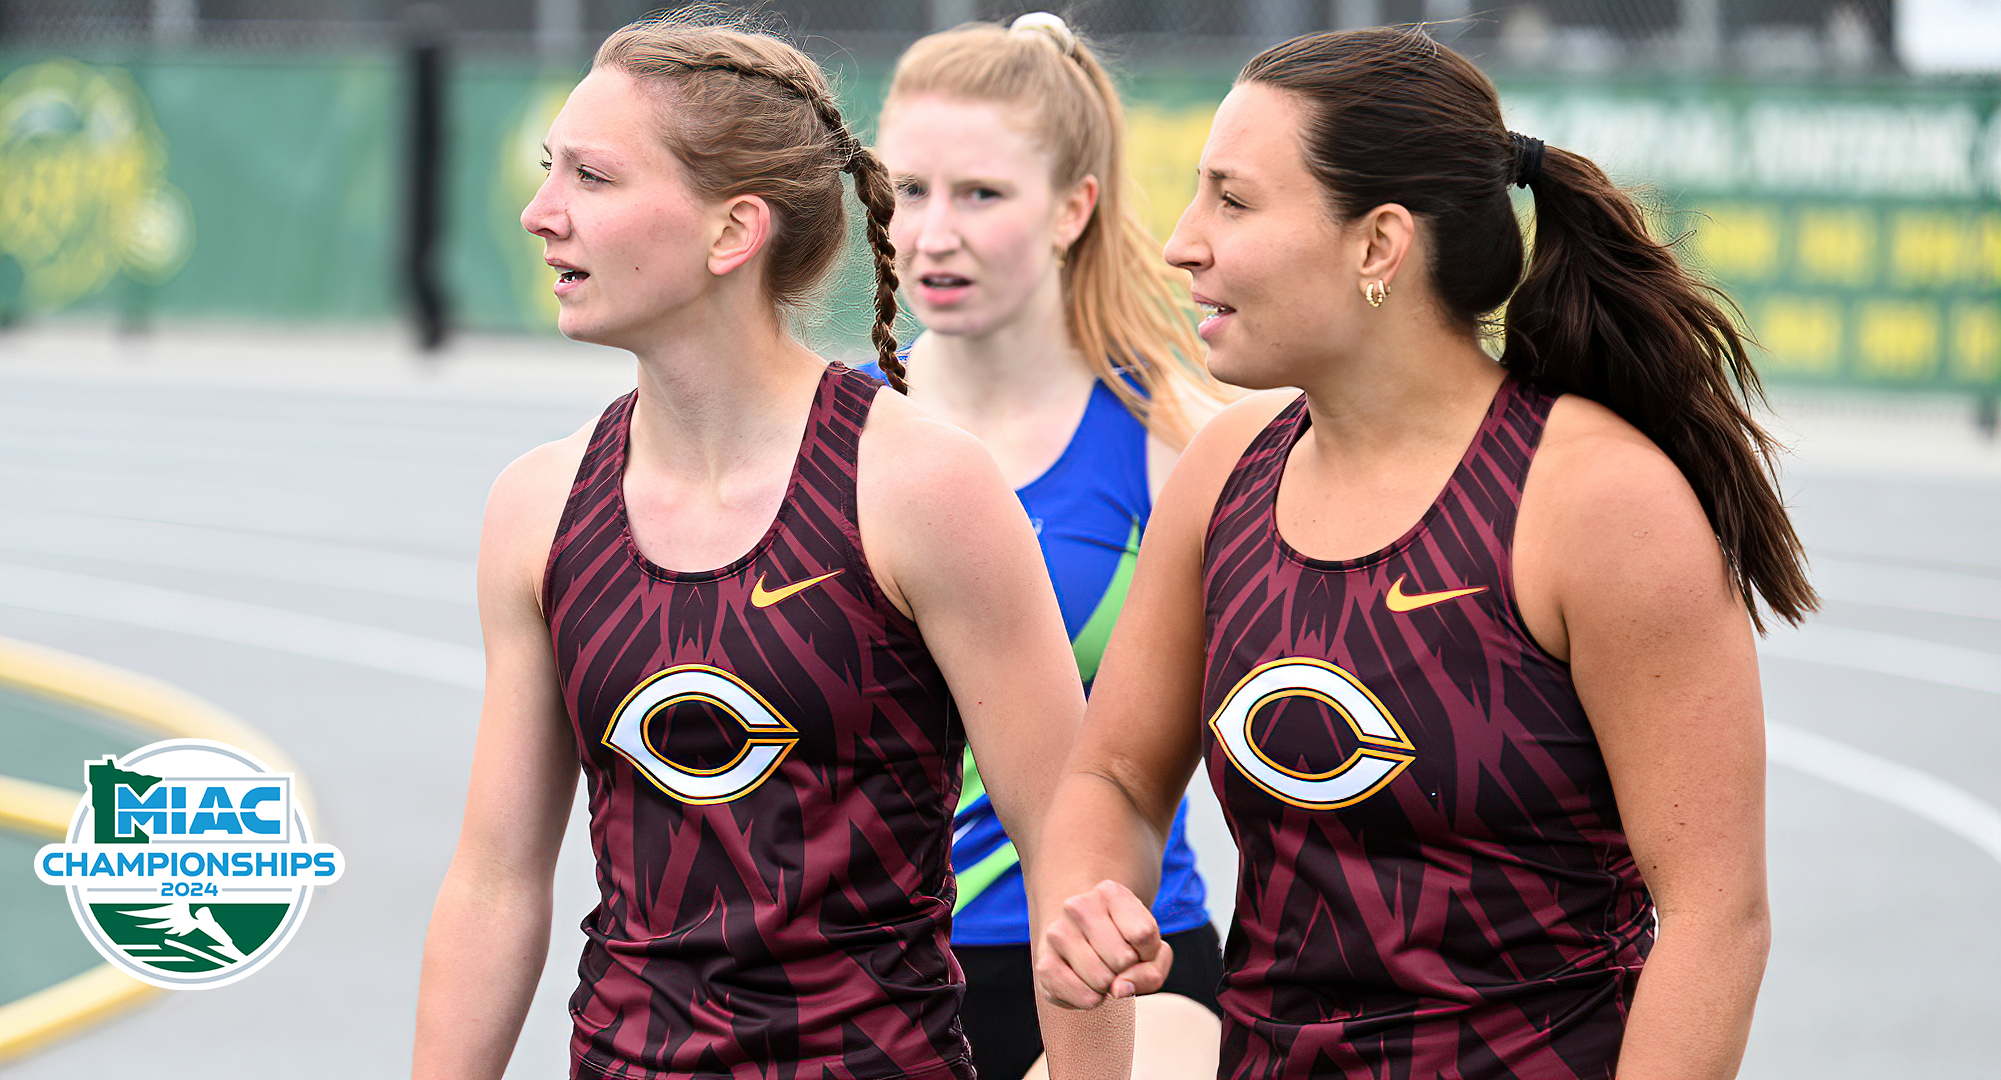 Emily Rengo (L) and Andie Sandman were two of five Cobbers who qualified for the finals in track events at the MIAC Championship Meet.